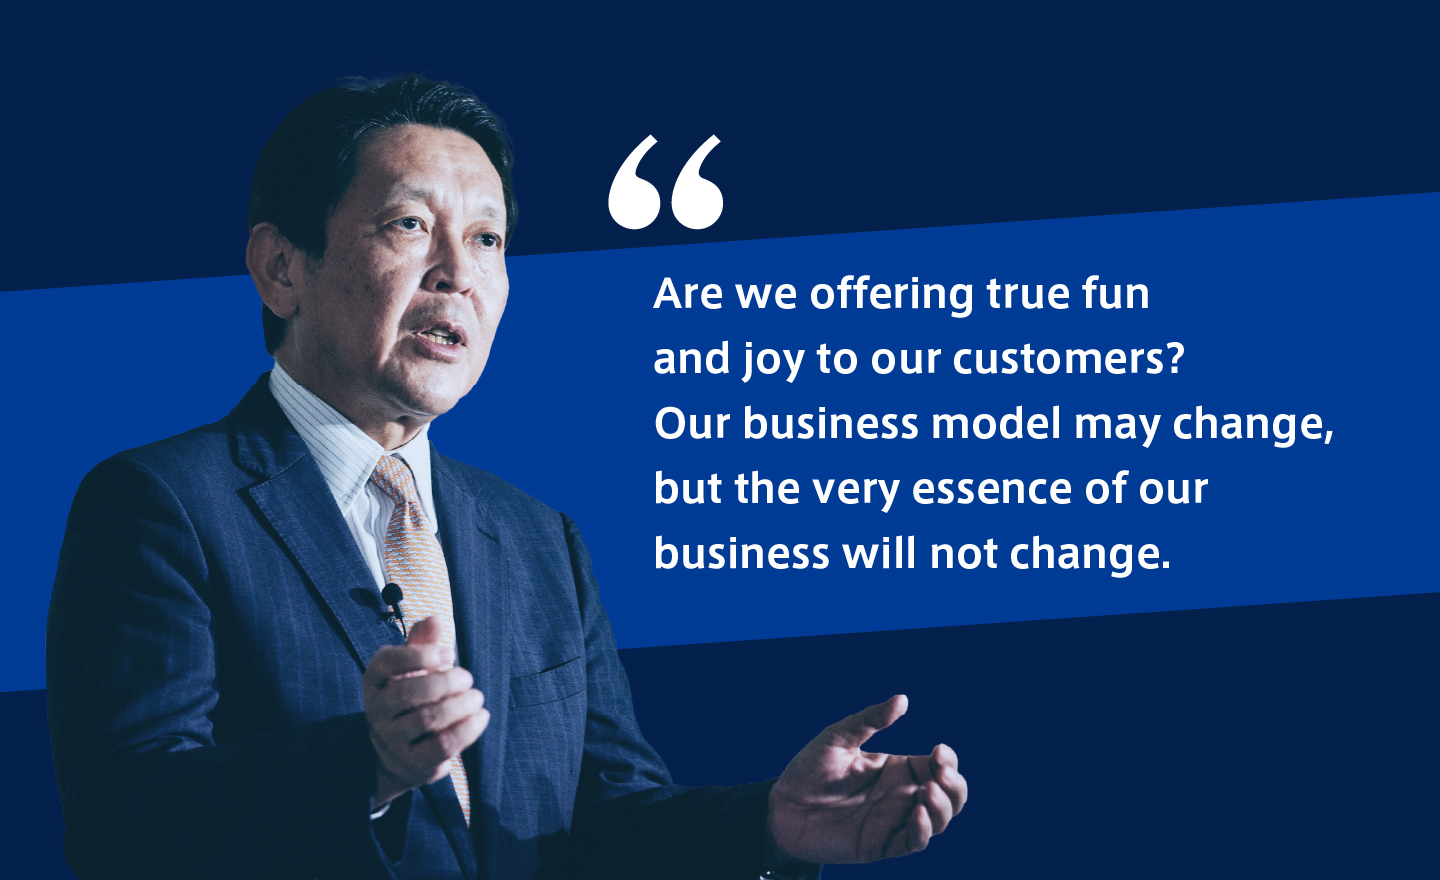 Our business model may change, but the very essence of our business will not change.